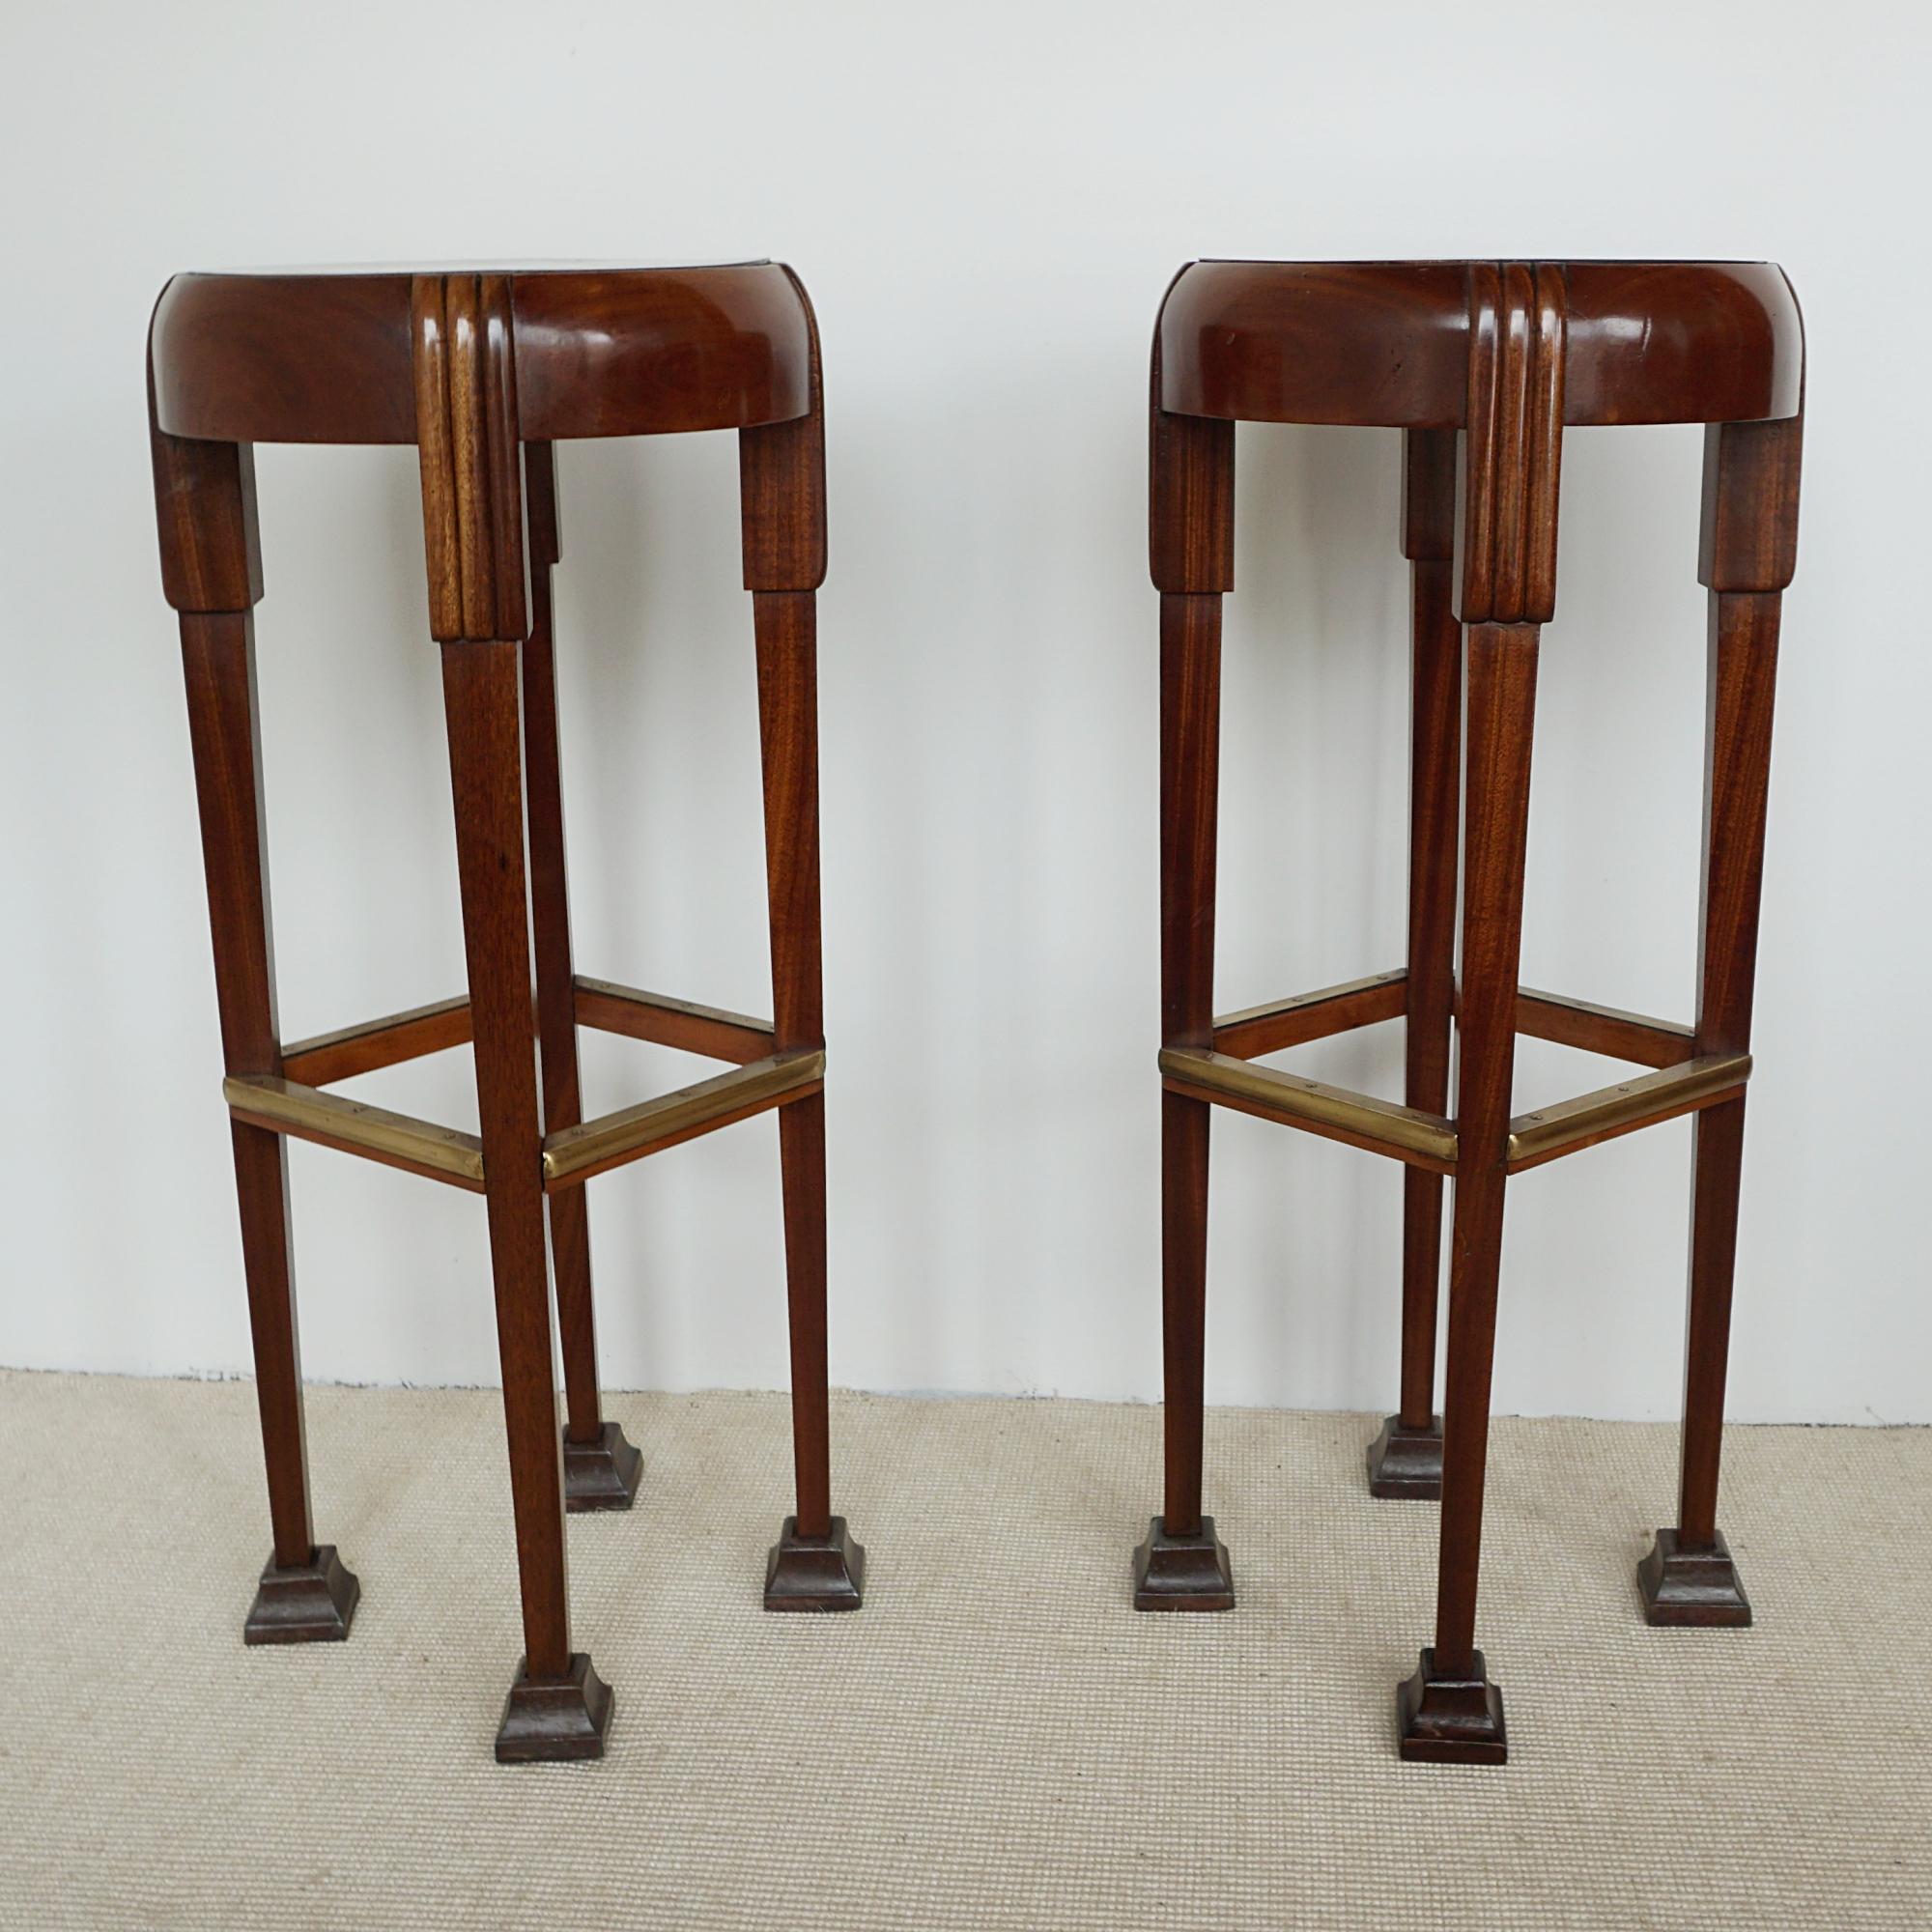 A pair of Art Deco bar stools. Solid walnut with figured walnut seat and brass banded stretchers.

Dimensions: H 80cm W 27cm

Origin: English

Date: Circa 1930

Item Number: 2404241